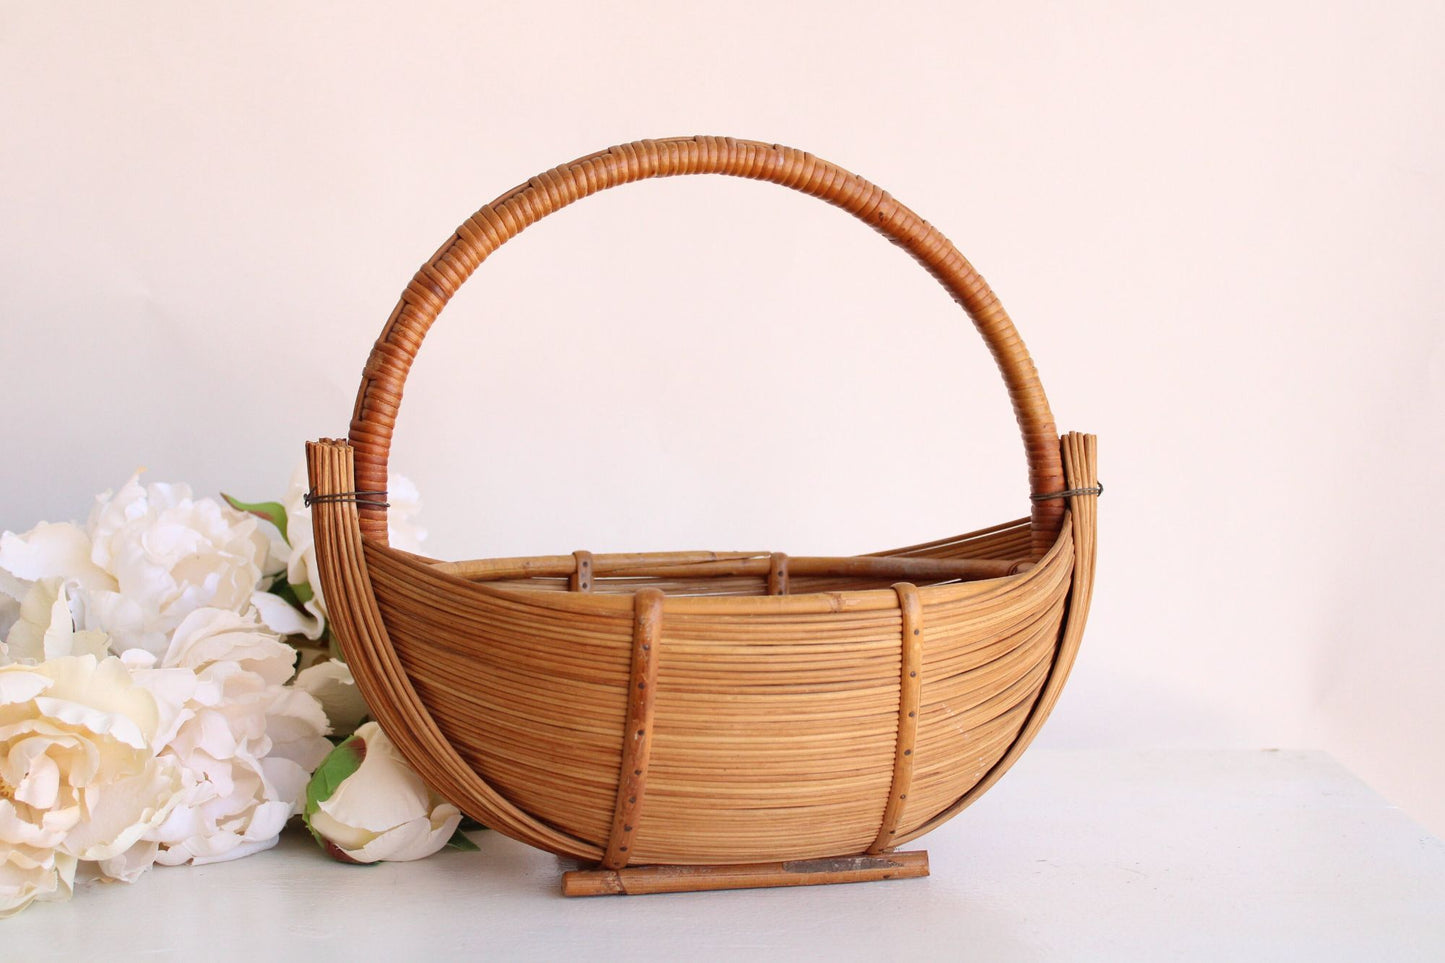 Vintage Wicker or Rattan Type Light Brown Oval Basket with Handle